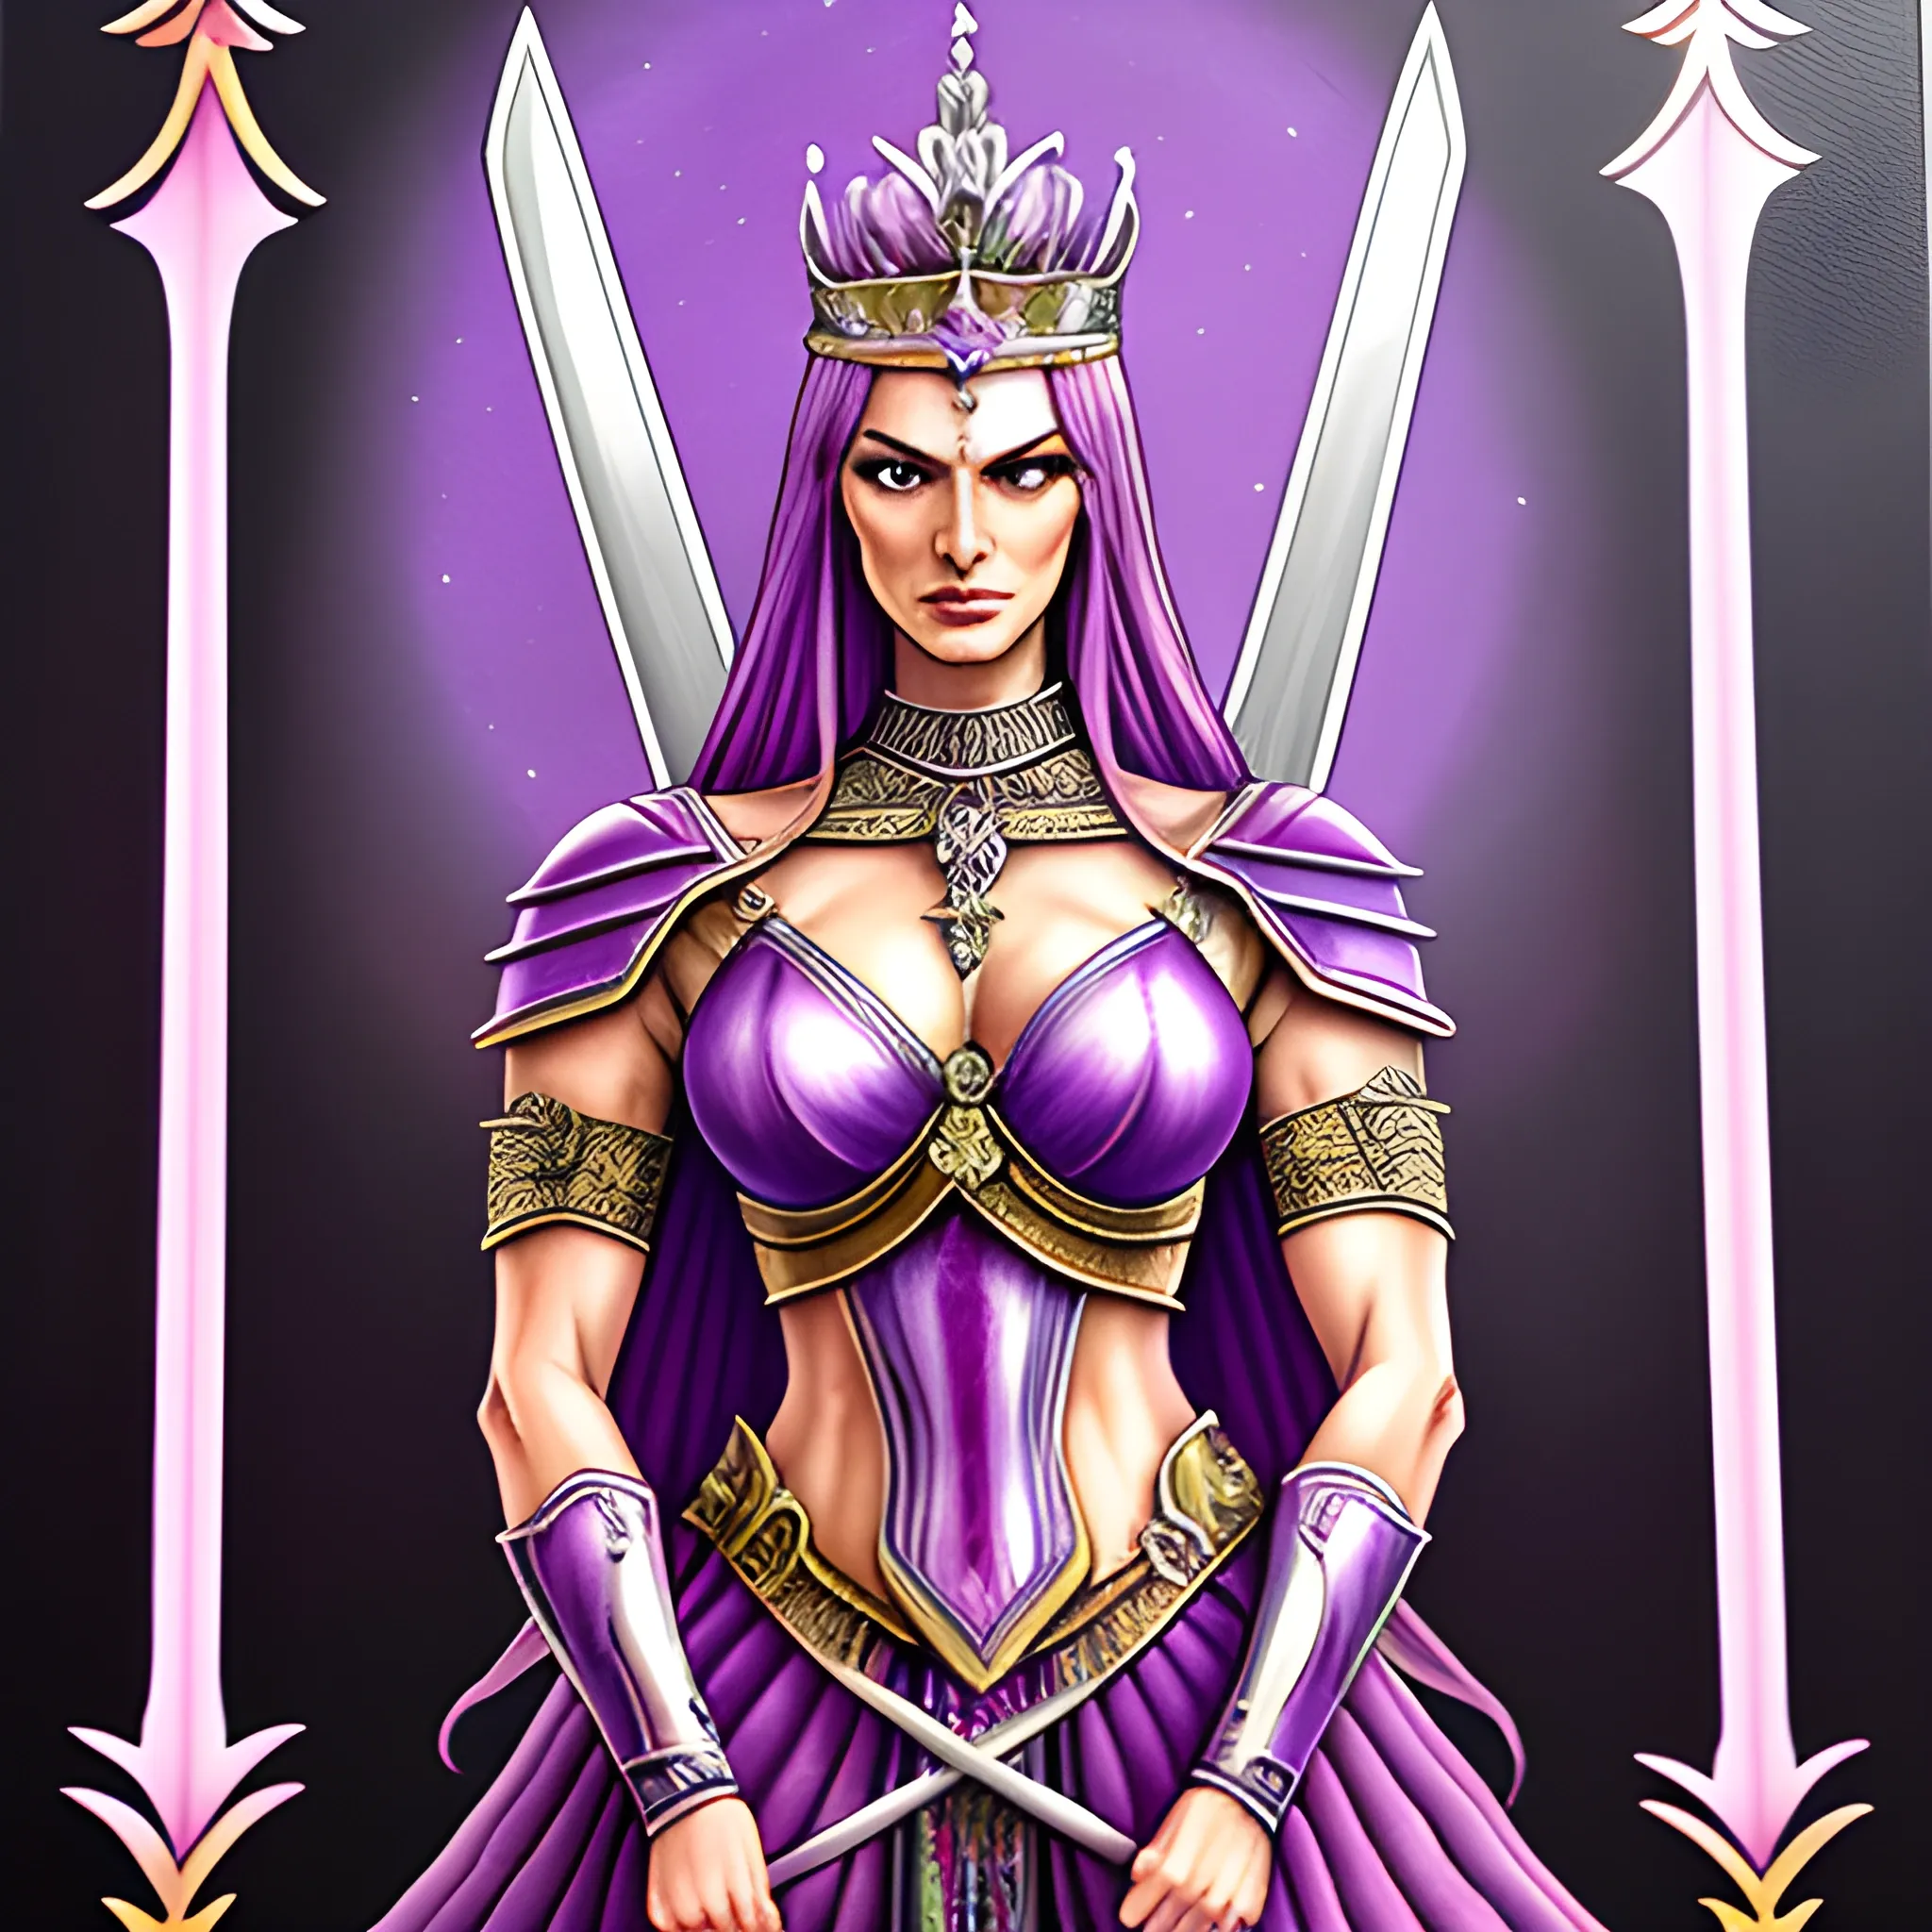 Realistic illustration of a young girl carrying five swords, highly detailed, for use in a Tarot Card deck, Tarot Card Style, mystical, purple, pink and neutral colors, childlike empress, sparkle,  border,  minor arcana, oil painting 
Negative prompt: bad,  ugly,  bad hands, watermark